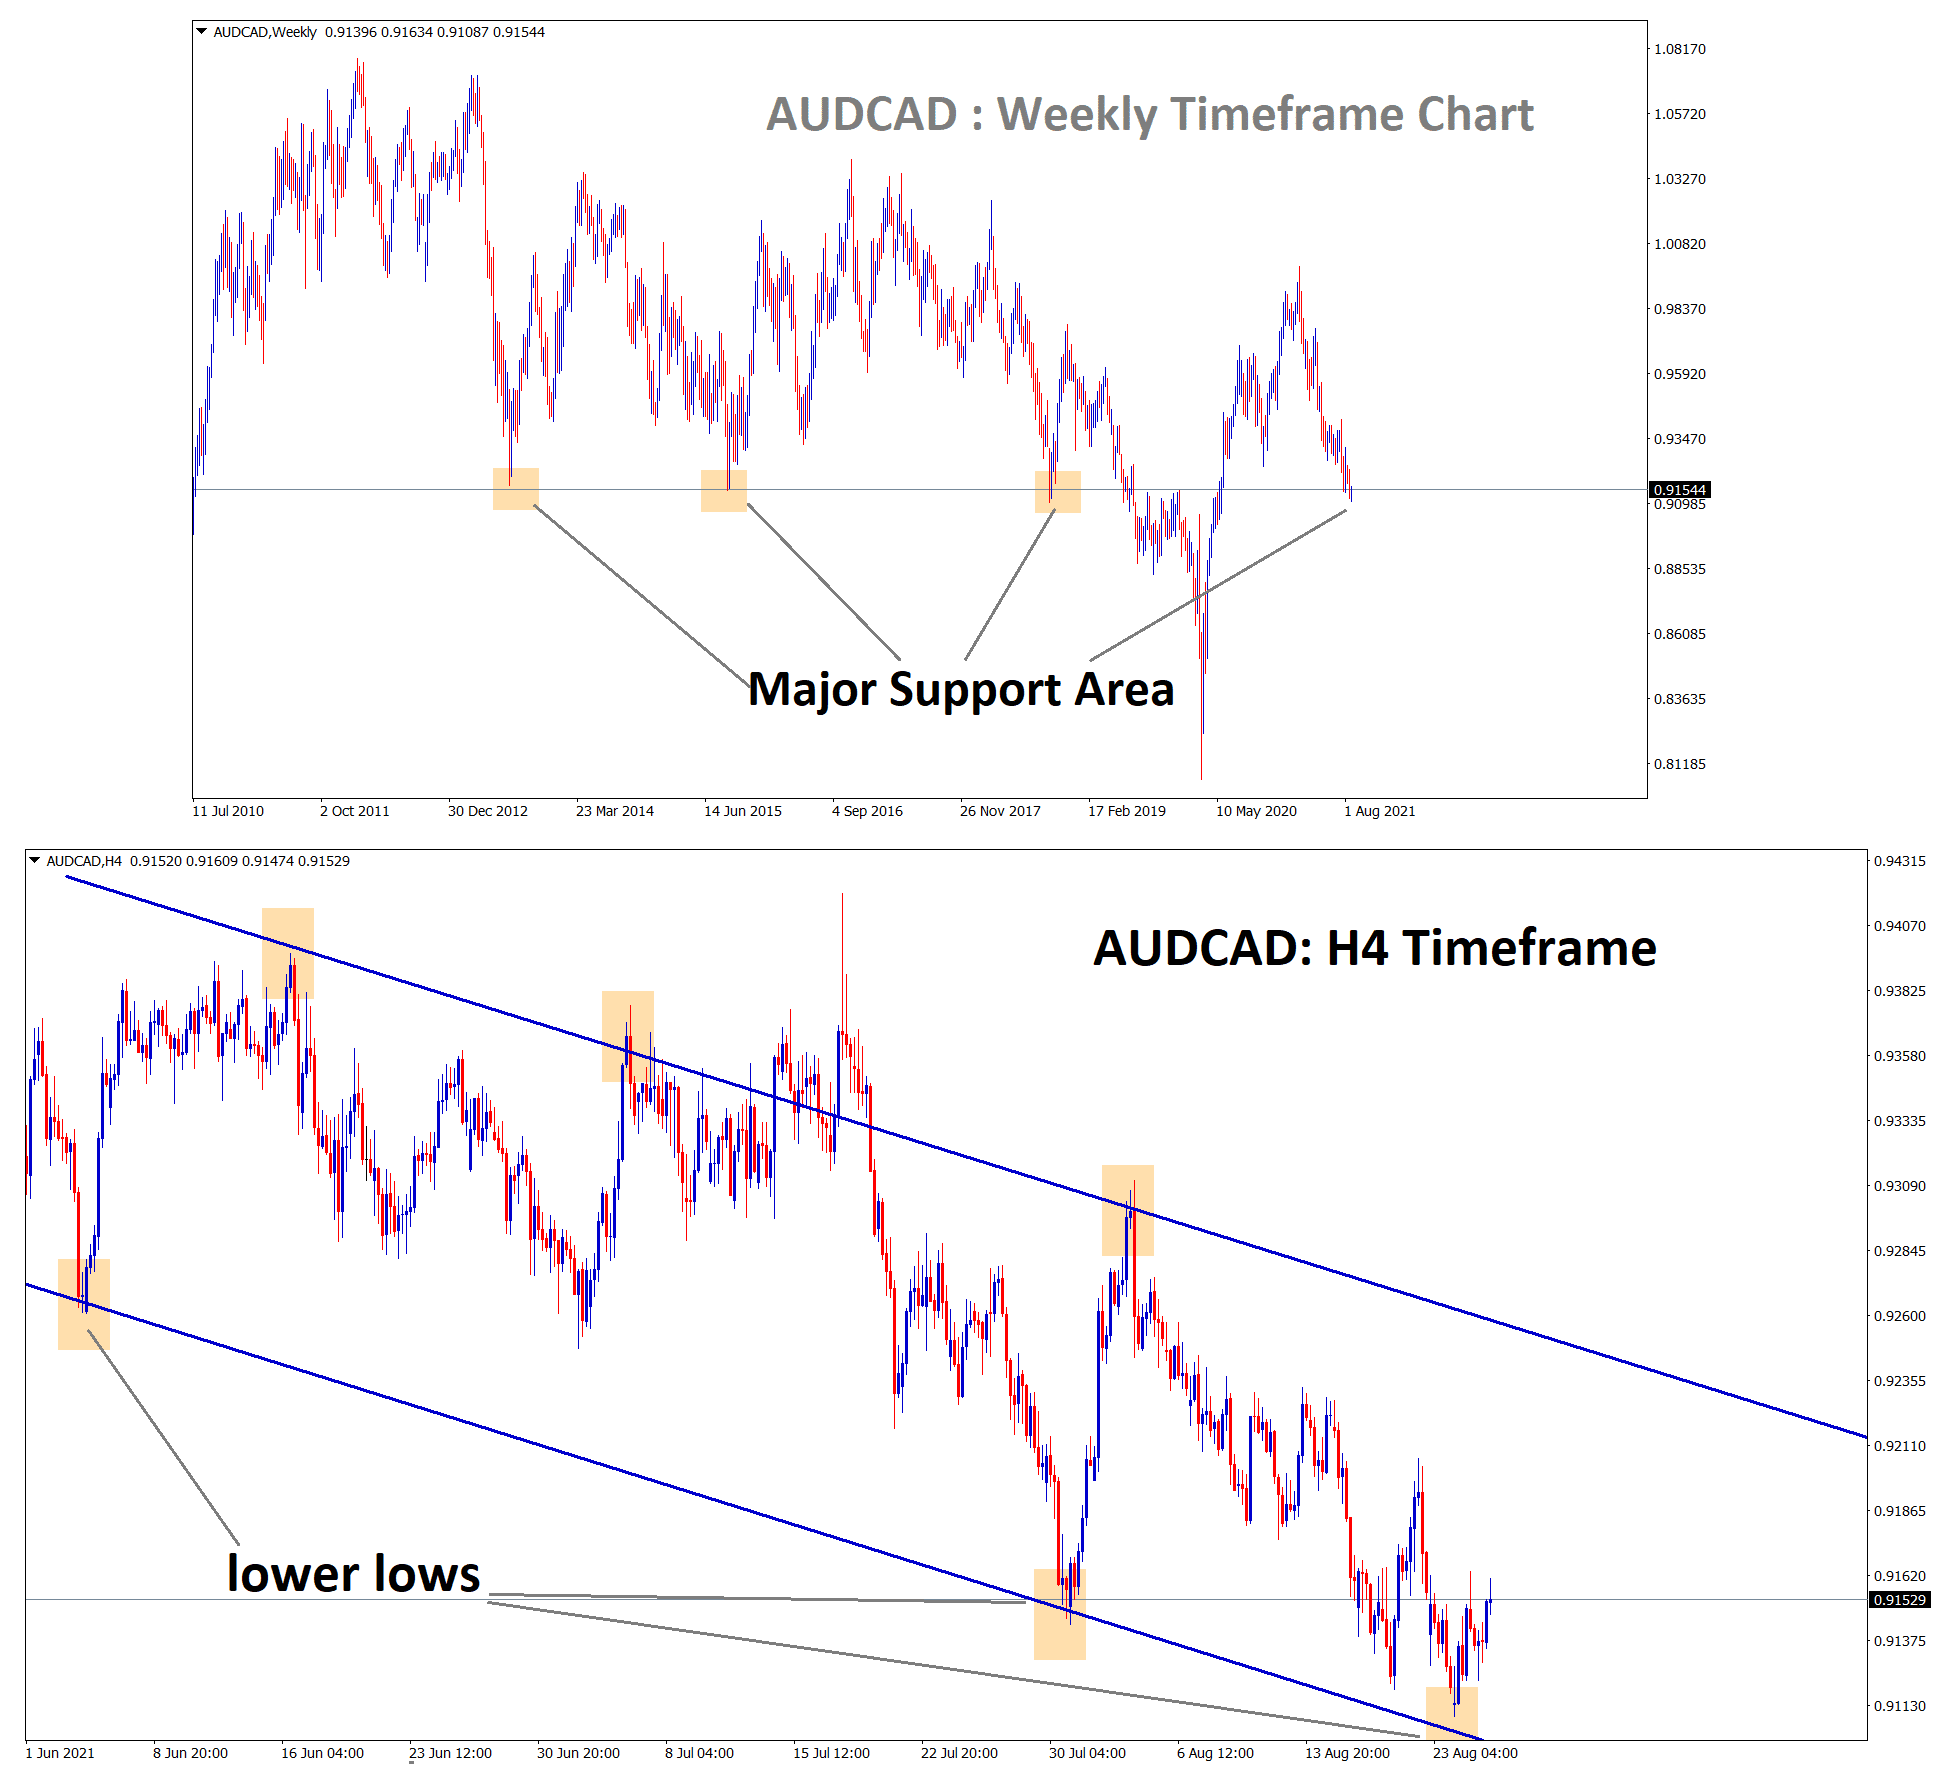 AUDCAD is standing exactly at the major support area